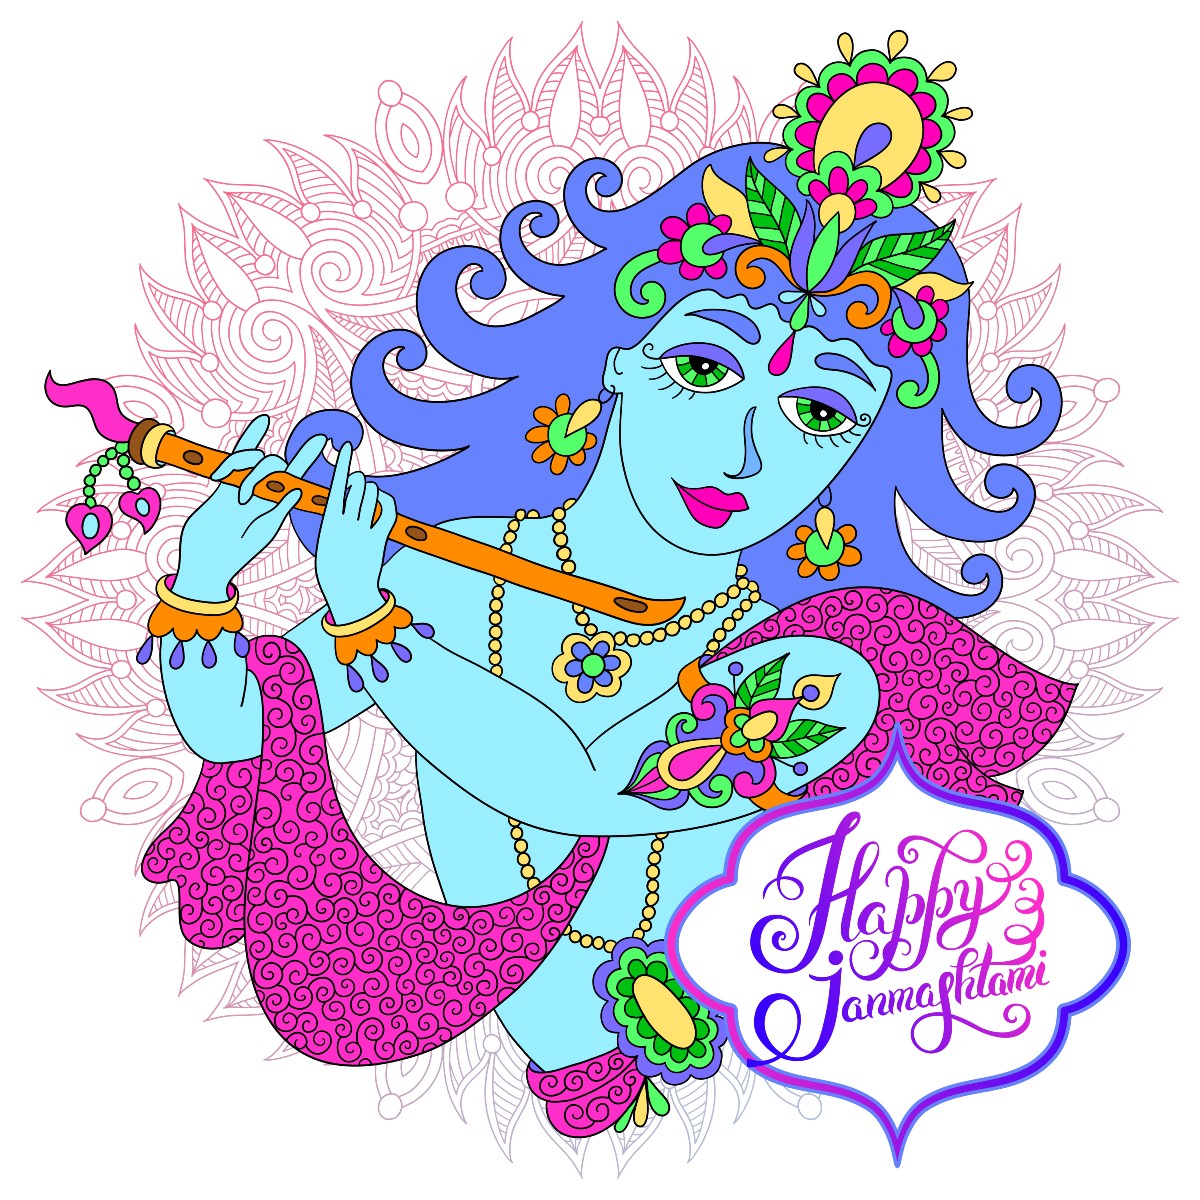 Happy Janmashtami 2021: Images, Wishes, Quotes, Messages and WhatsApp